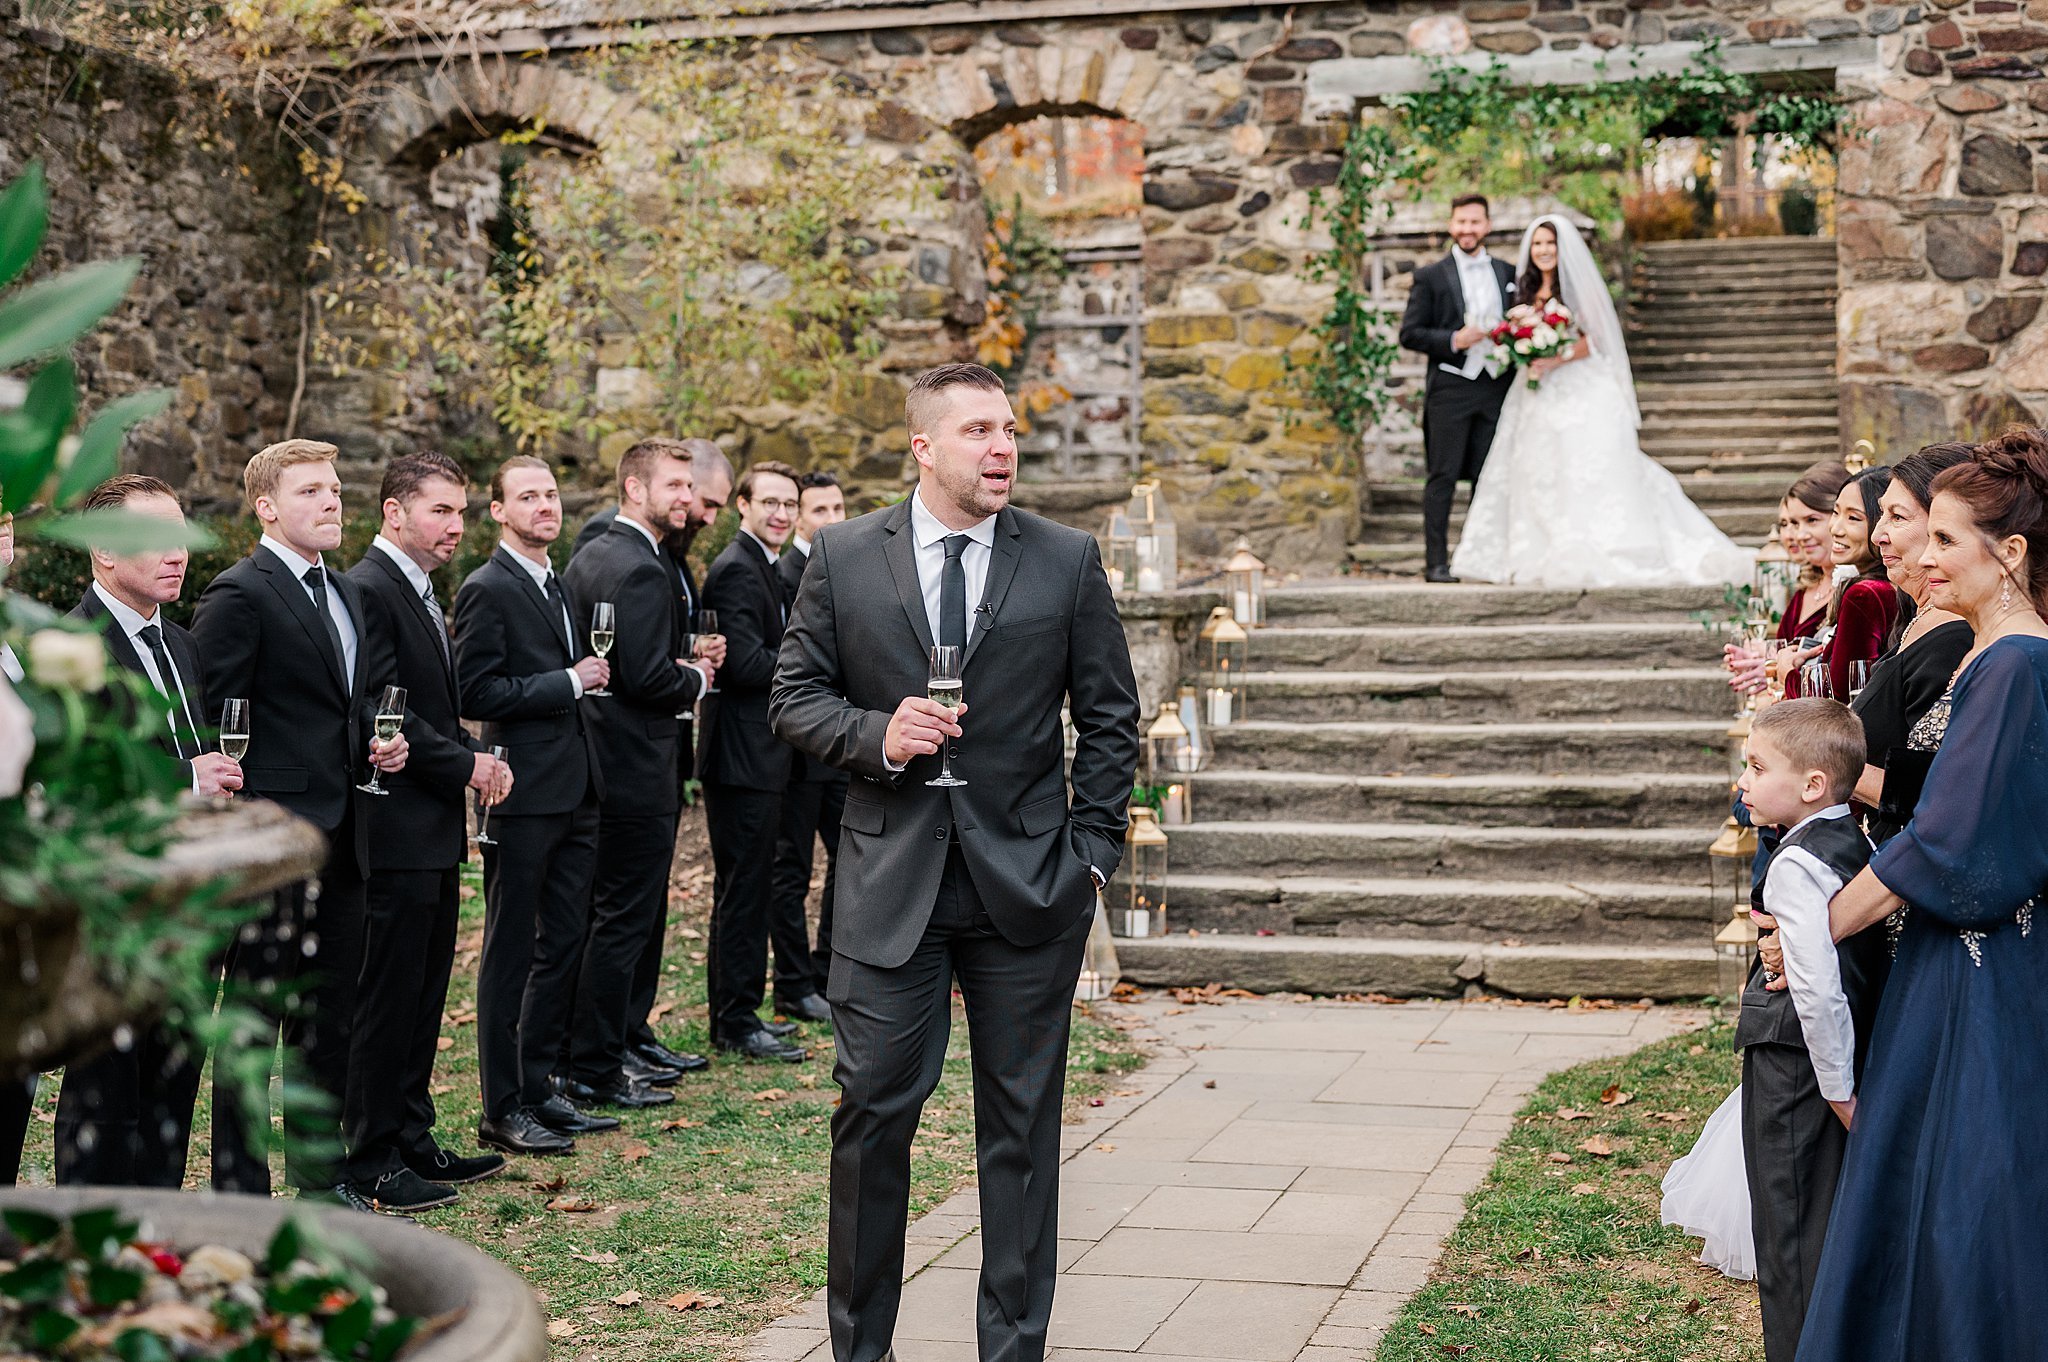 Hunting Hill Mansion Parque Ridley Creek Park Newtown Sauare PA Luxury Autumn Wedding Photography_3950.jpg